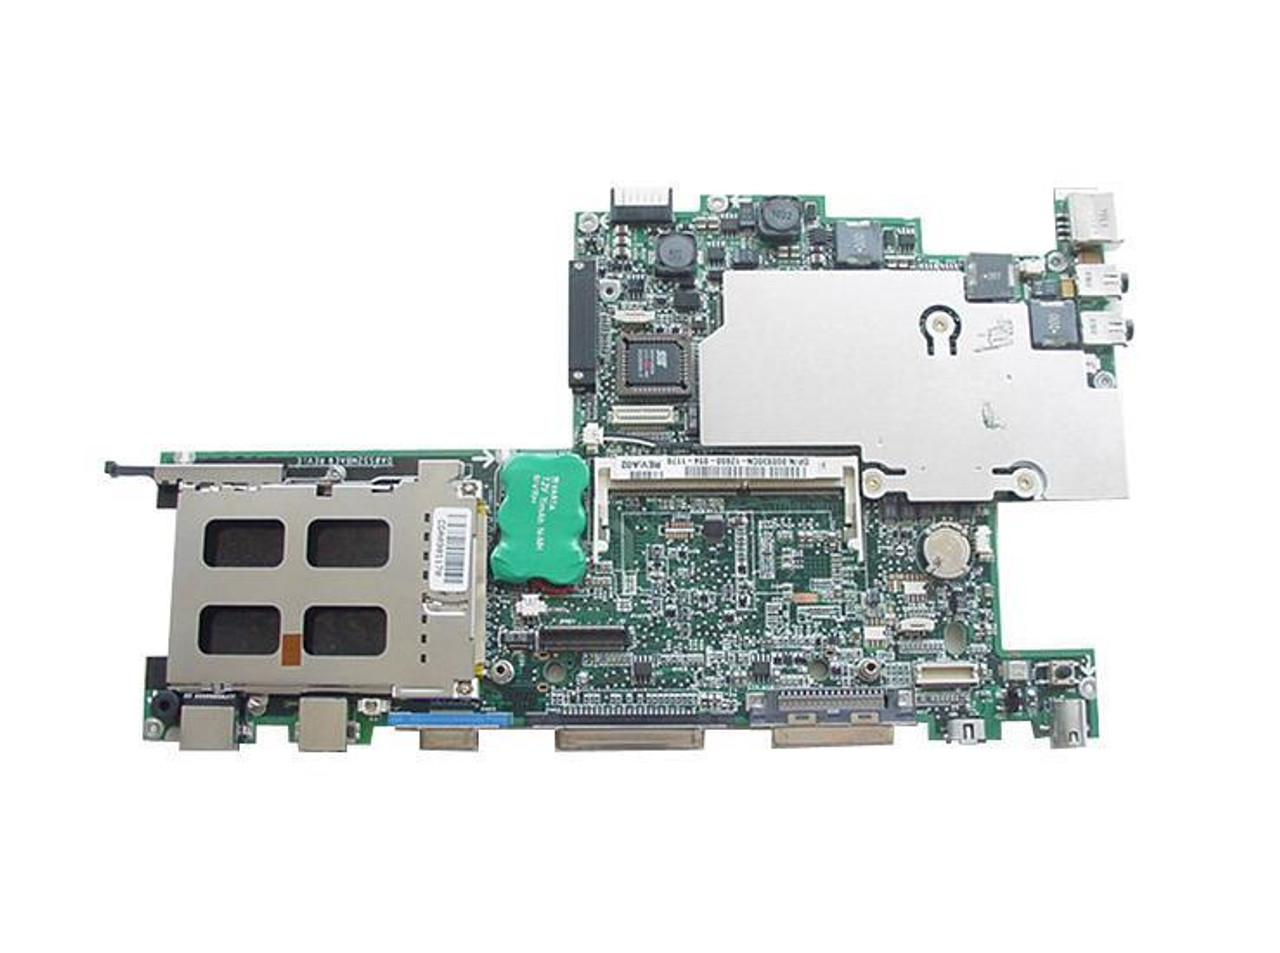 06114T Dell System Board (Motherboard) With 500MHz CPU For Latitude CPX (Refurbished)